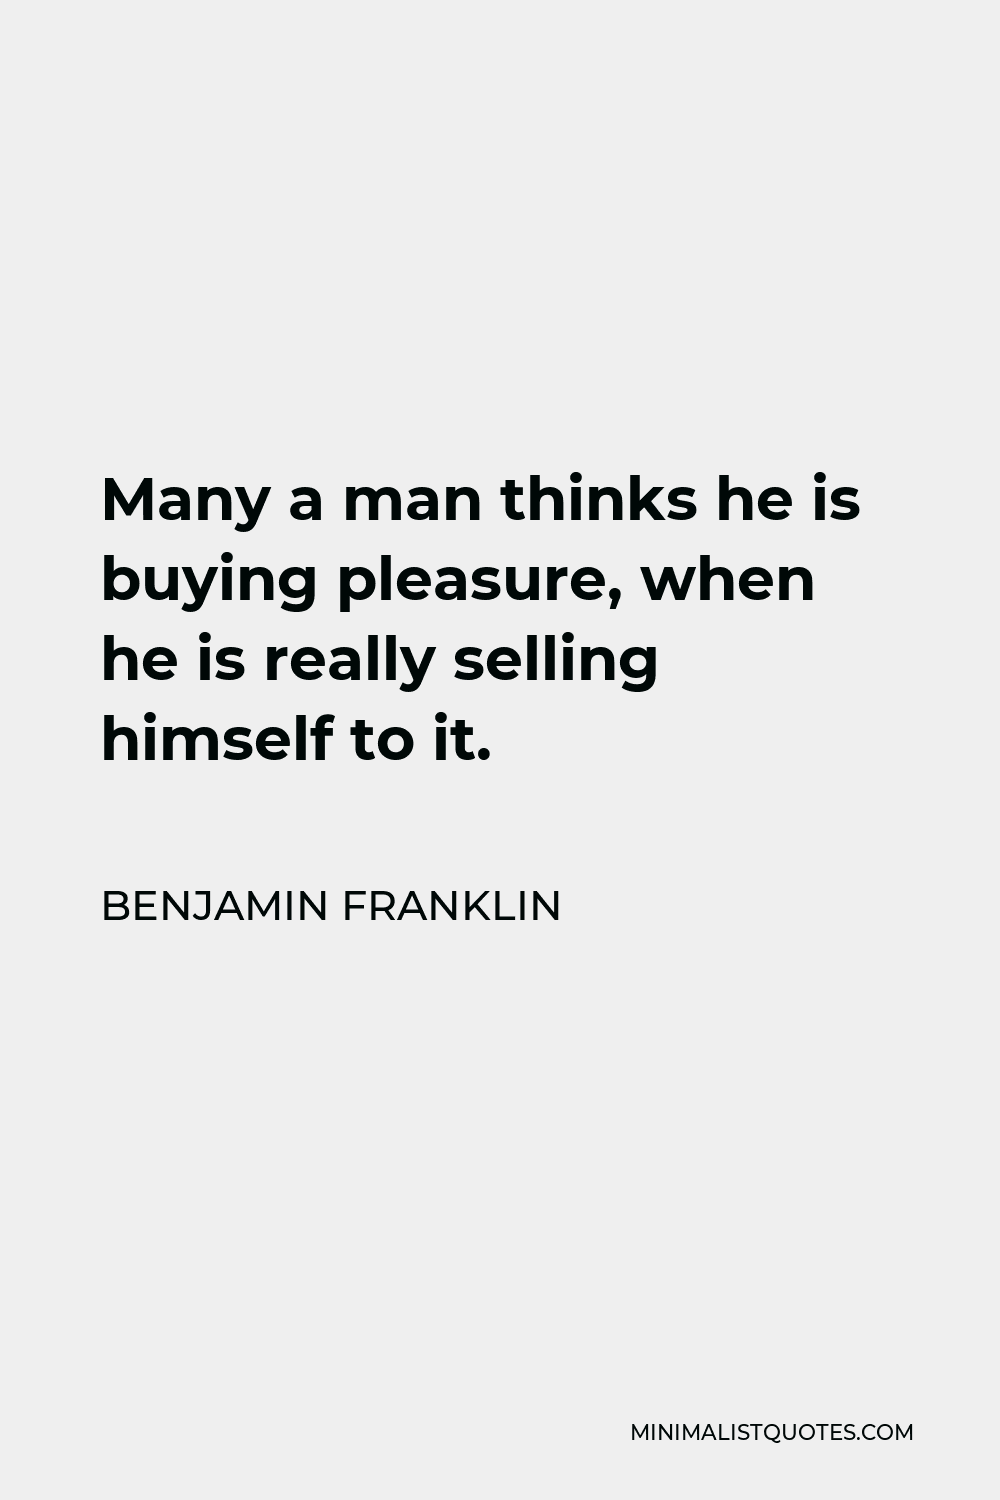 Benjamin Franklin Quote - Many a man thinks he is buying pleasure, when he is really selling himself to it.